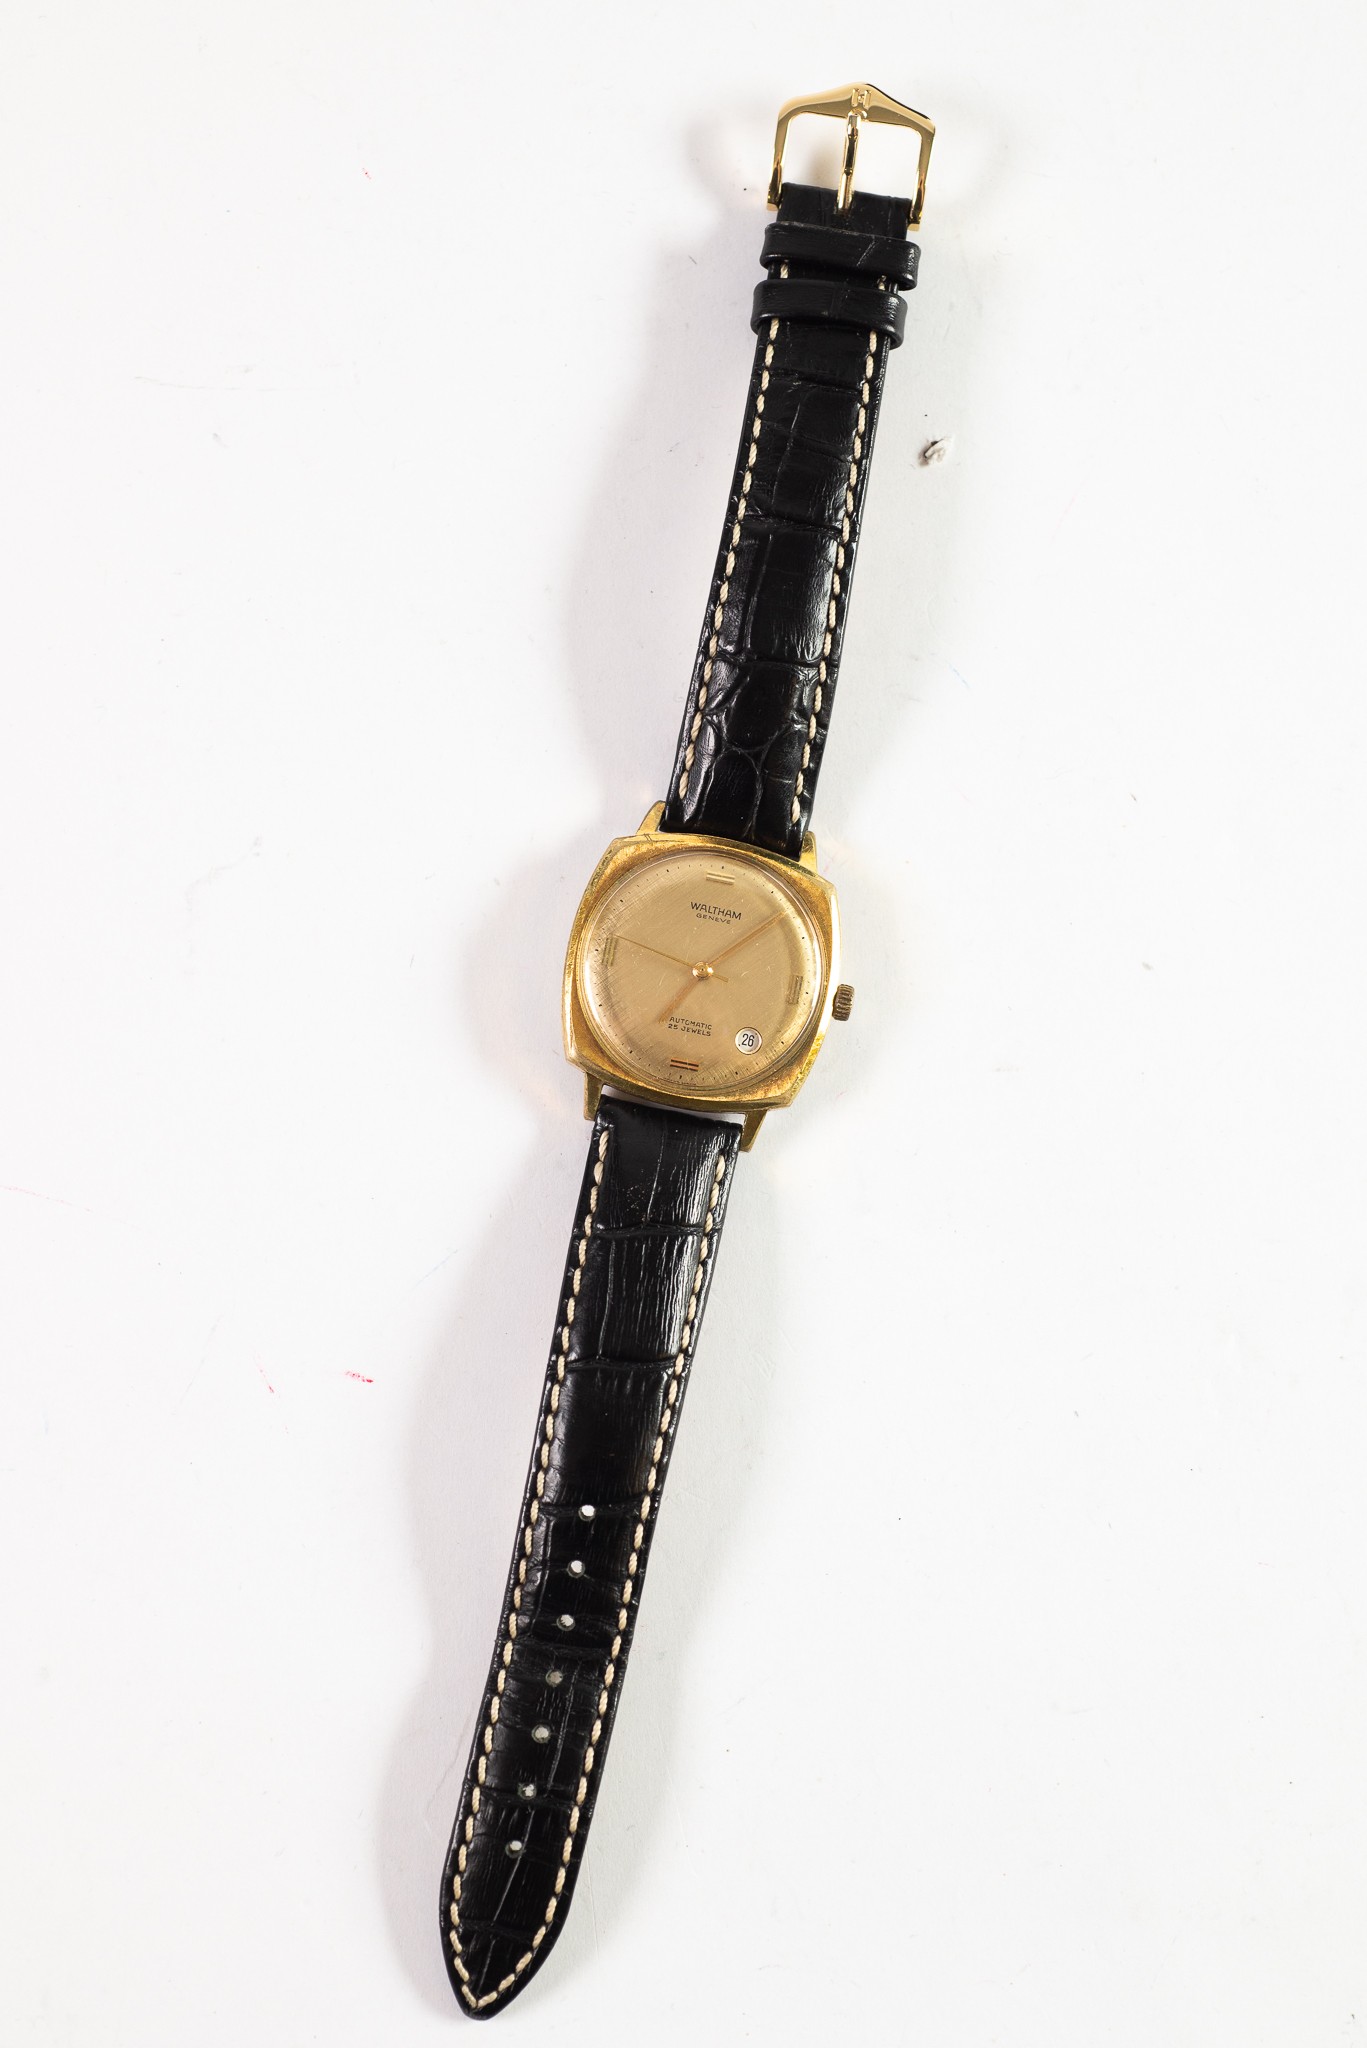 CIRCA 1970'S WALTHAM GENEVE GENTLEMAN'S GILT CASED AUTOMATIC WRIST WATCH with 25 jewels movement,